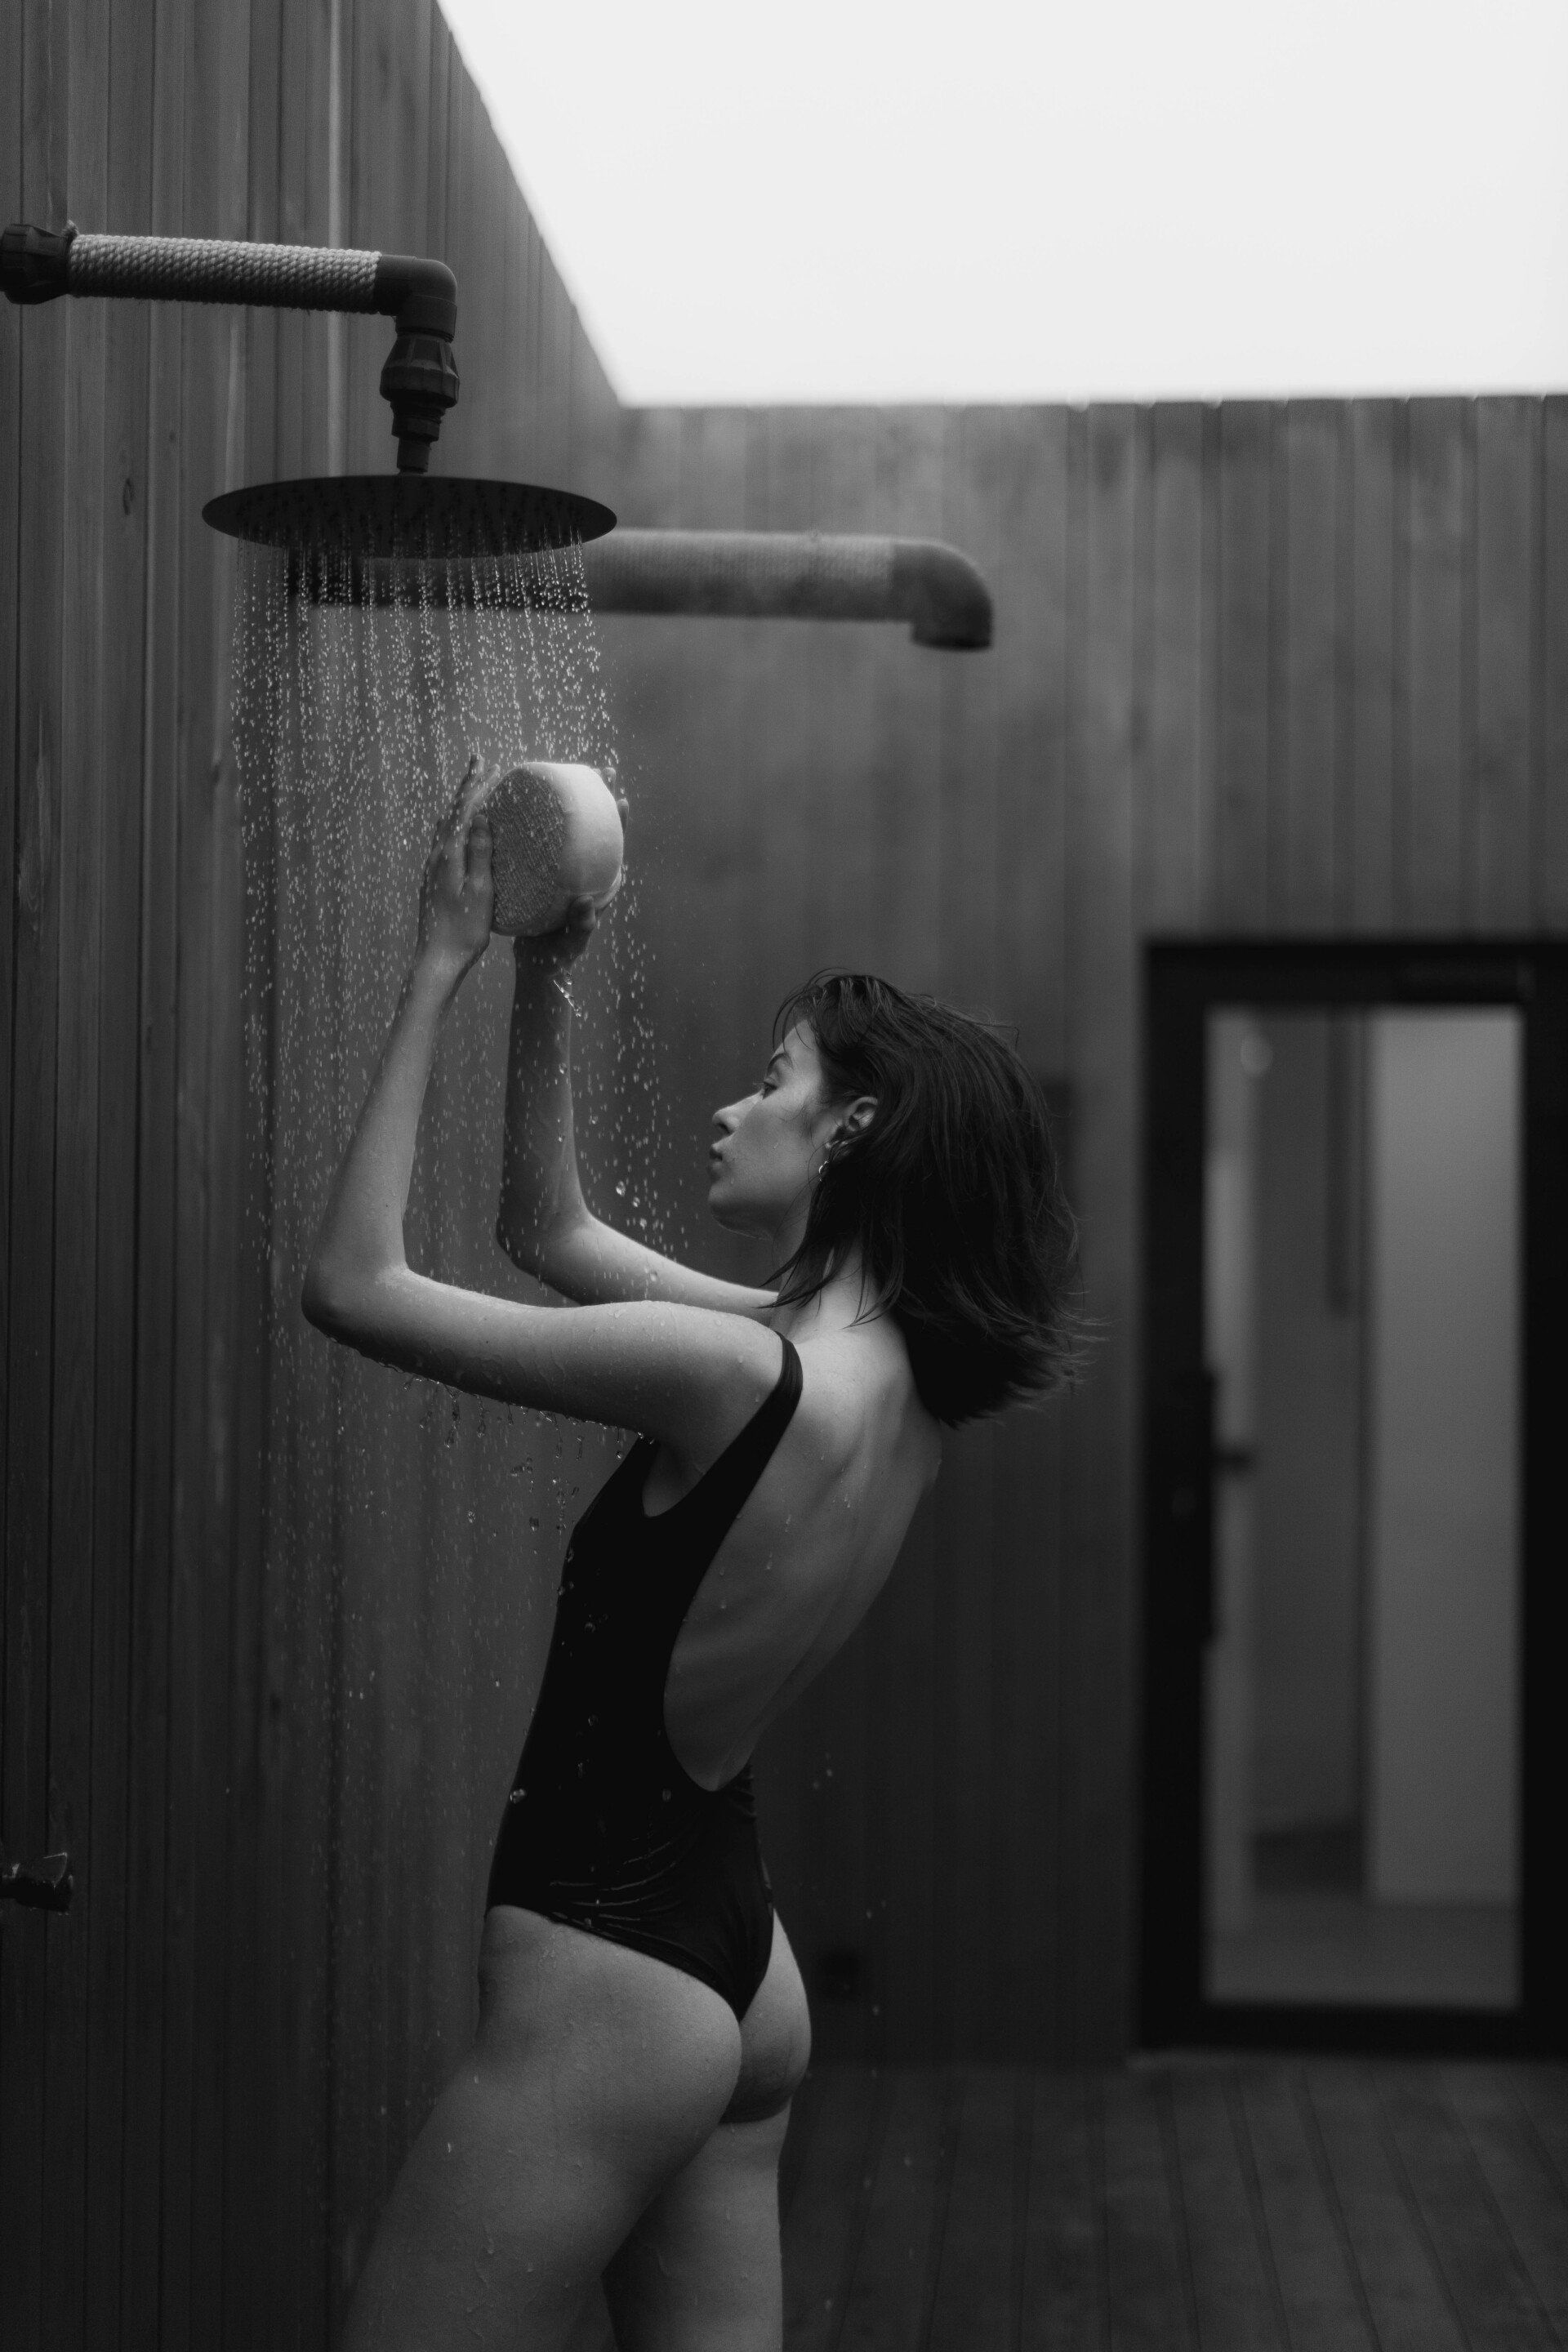 a woman taking a shower